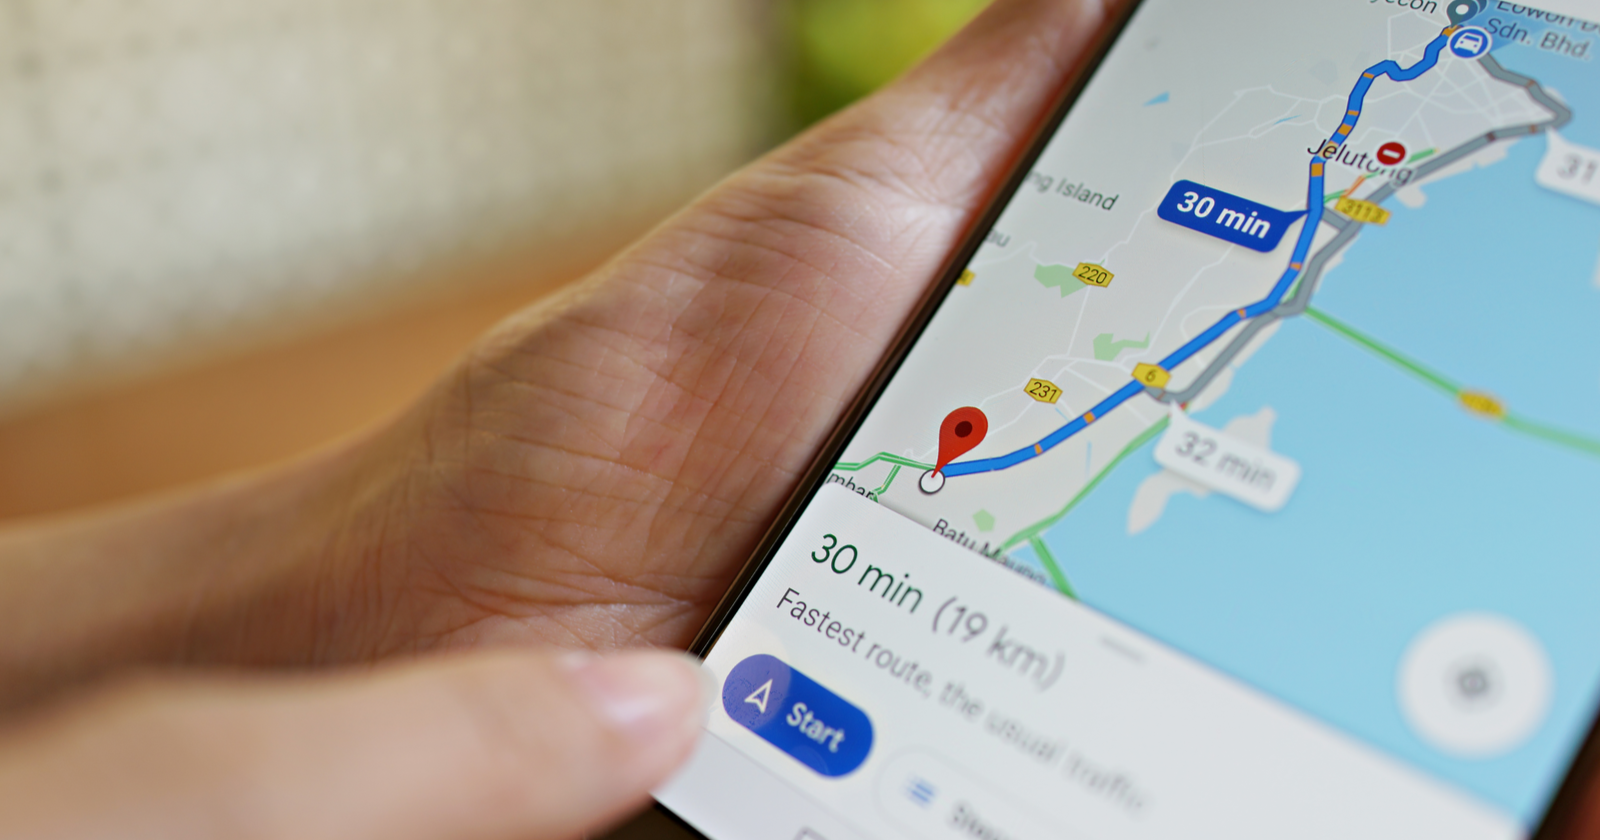 A Complete Guide to Google Maps Marketing